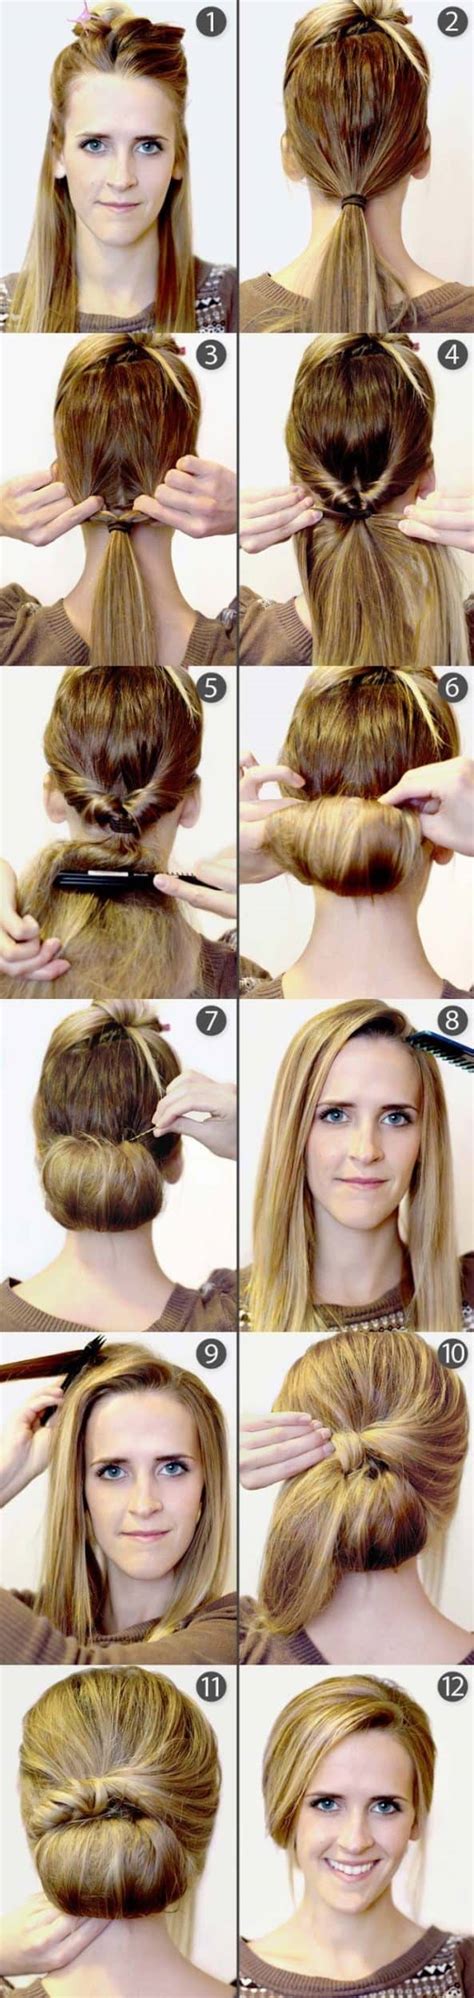 quick  easy step  step hairstyles  beginners   fashion